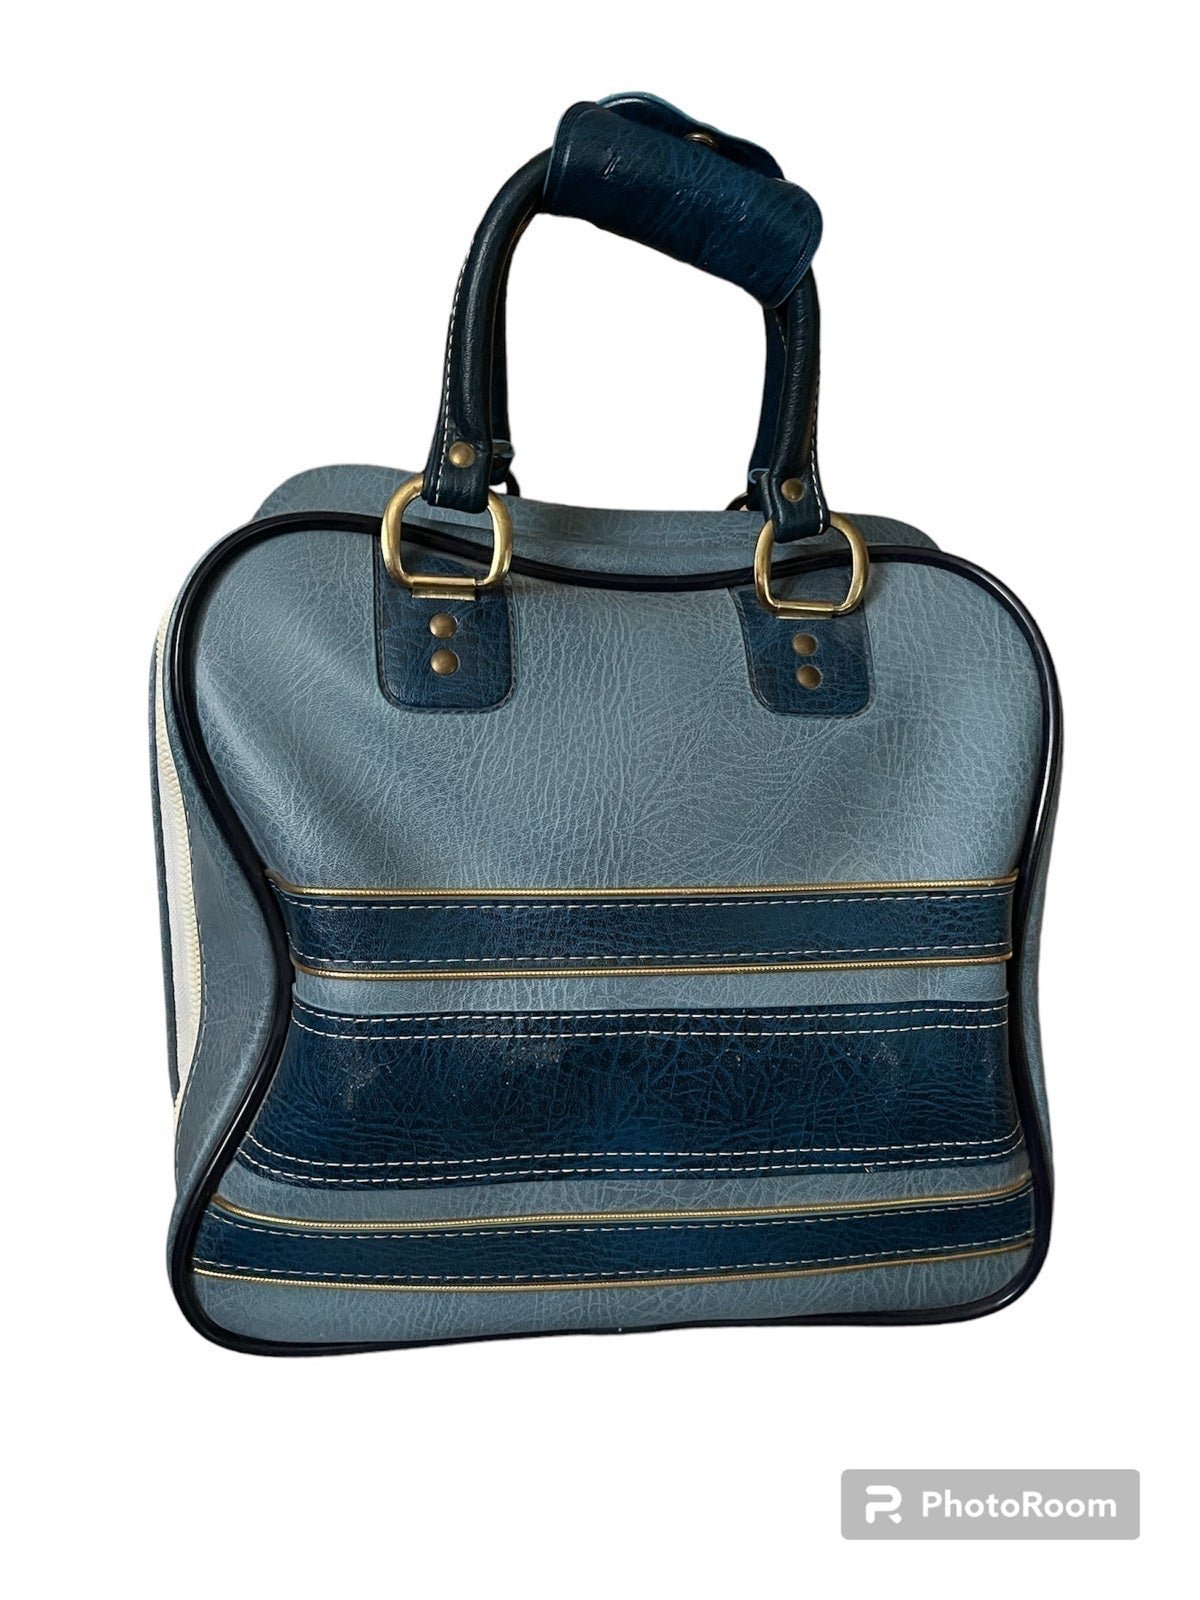 Vintage Bowling Bag Brunswick Blue With Gold Accents  B